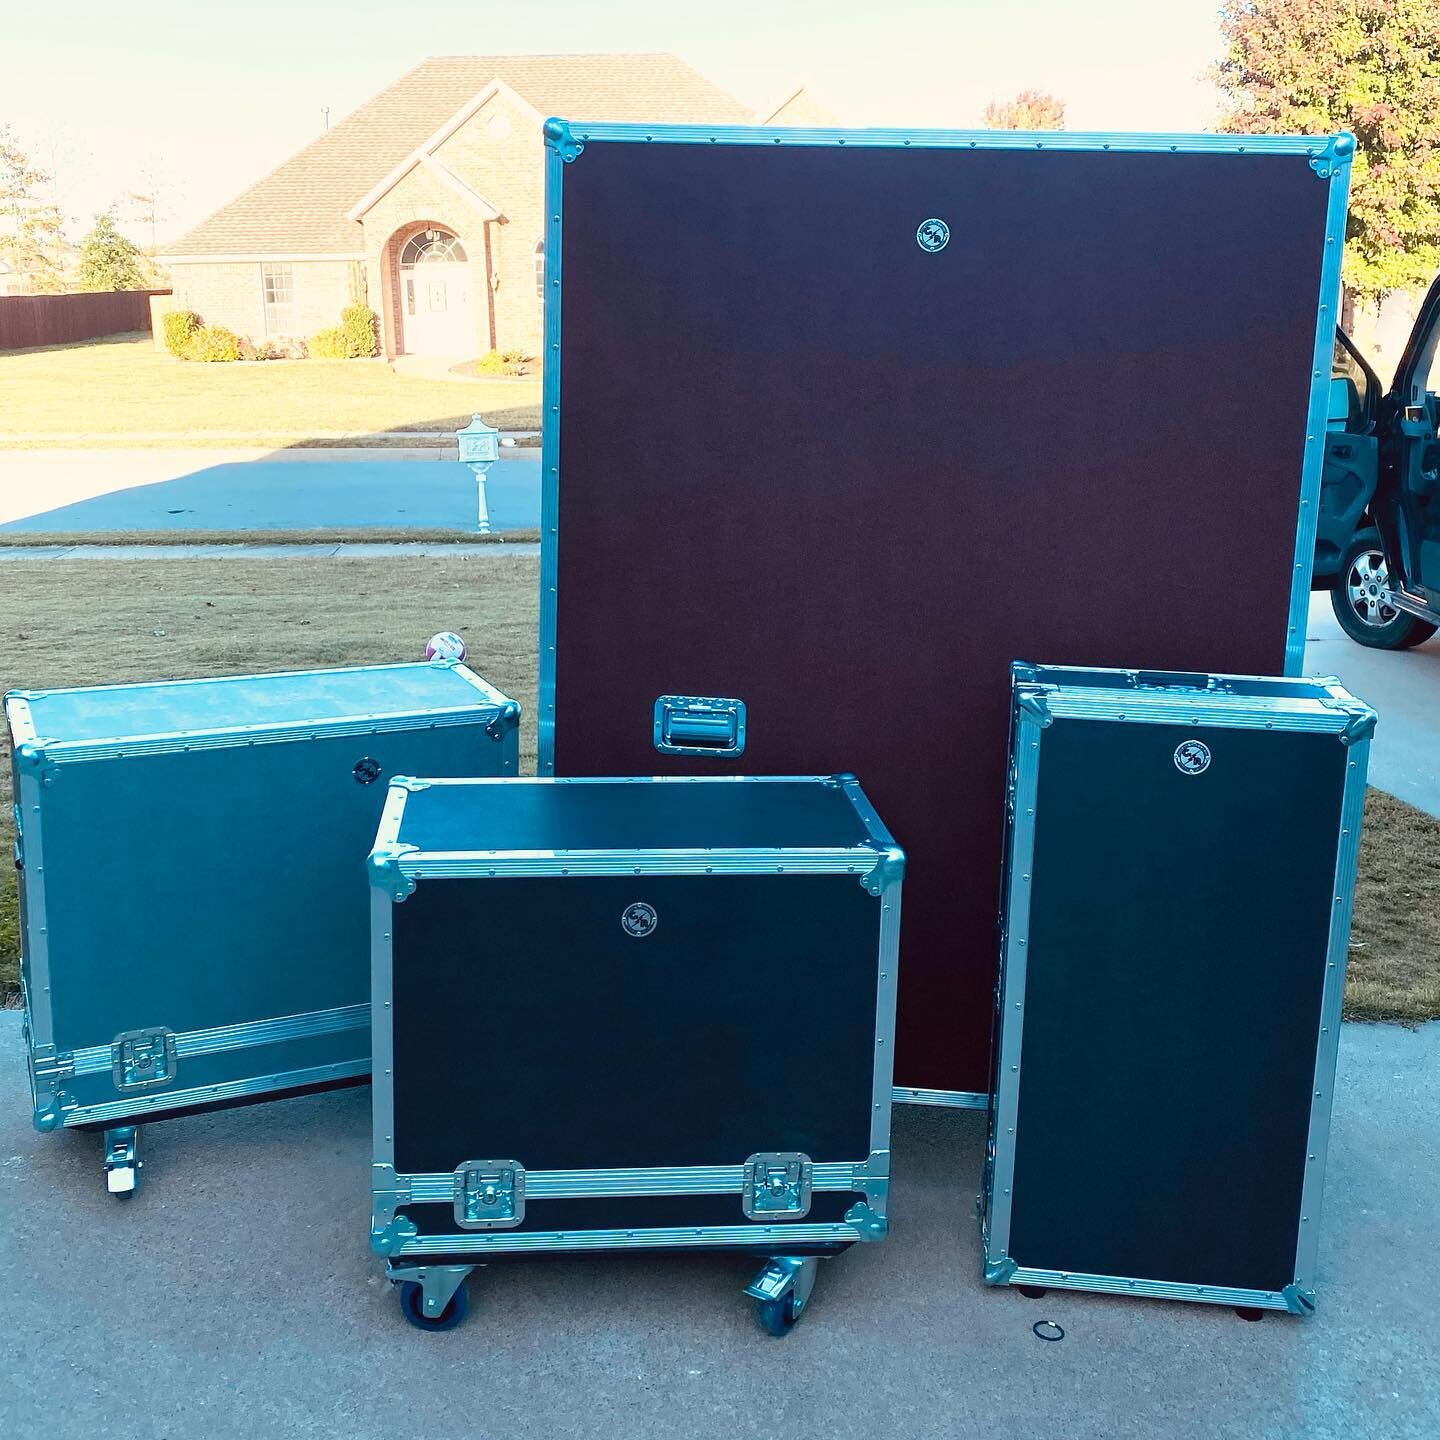 This weeks Deliveries include a Guitar Vault, two Cab Cases and a Steel Guitar Case built for a Beautiful Emmons D10